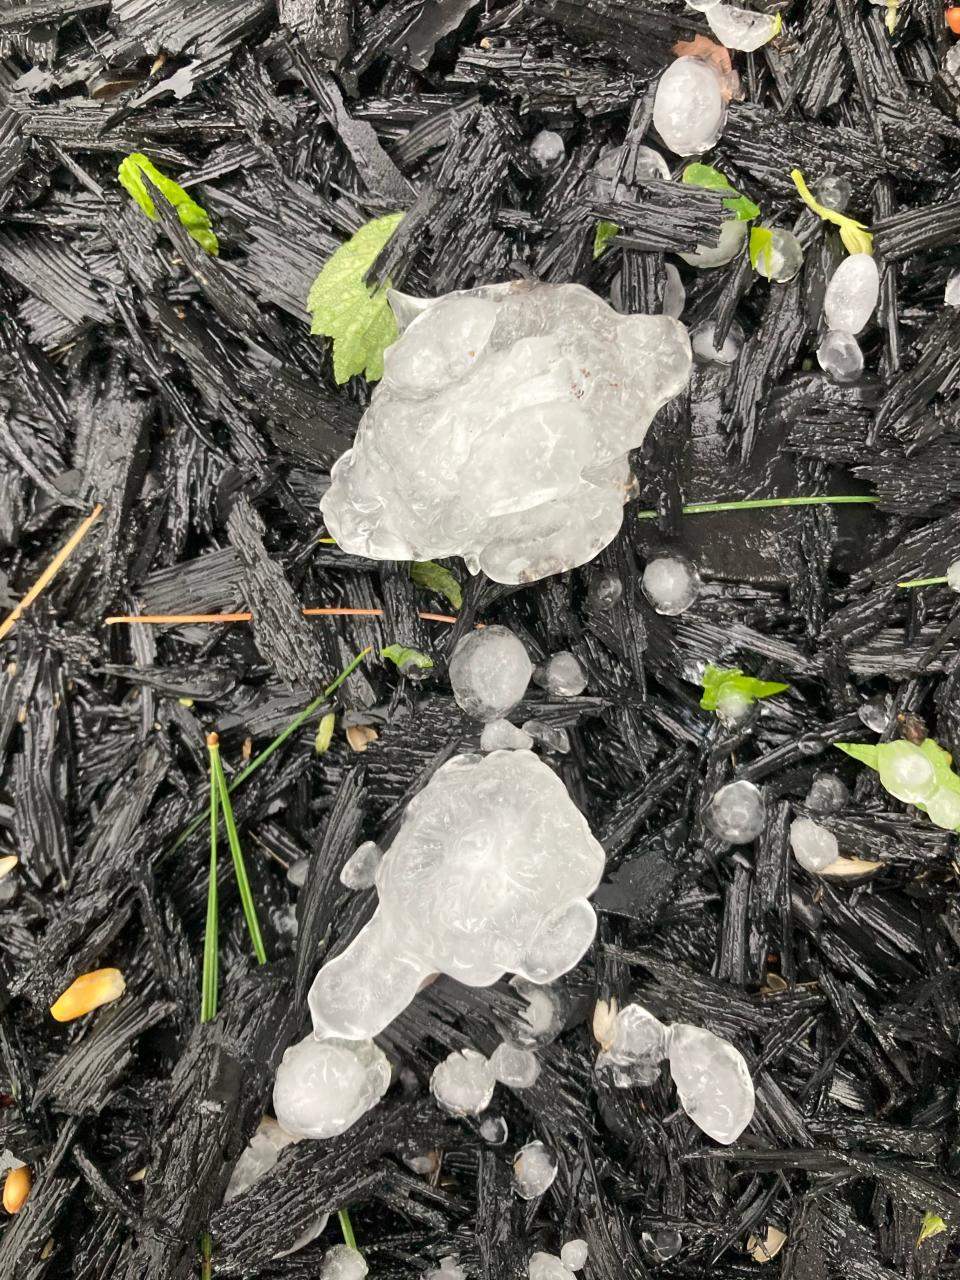 Storms blew through an area near Baltimore in Fairfield County on Tuesday, May 3, 2022, dropping golf ball-sized hail and knocking over trees.